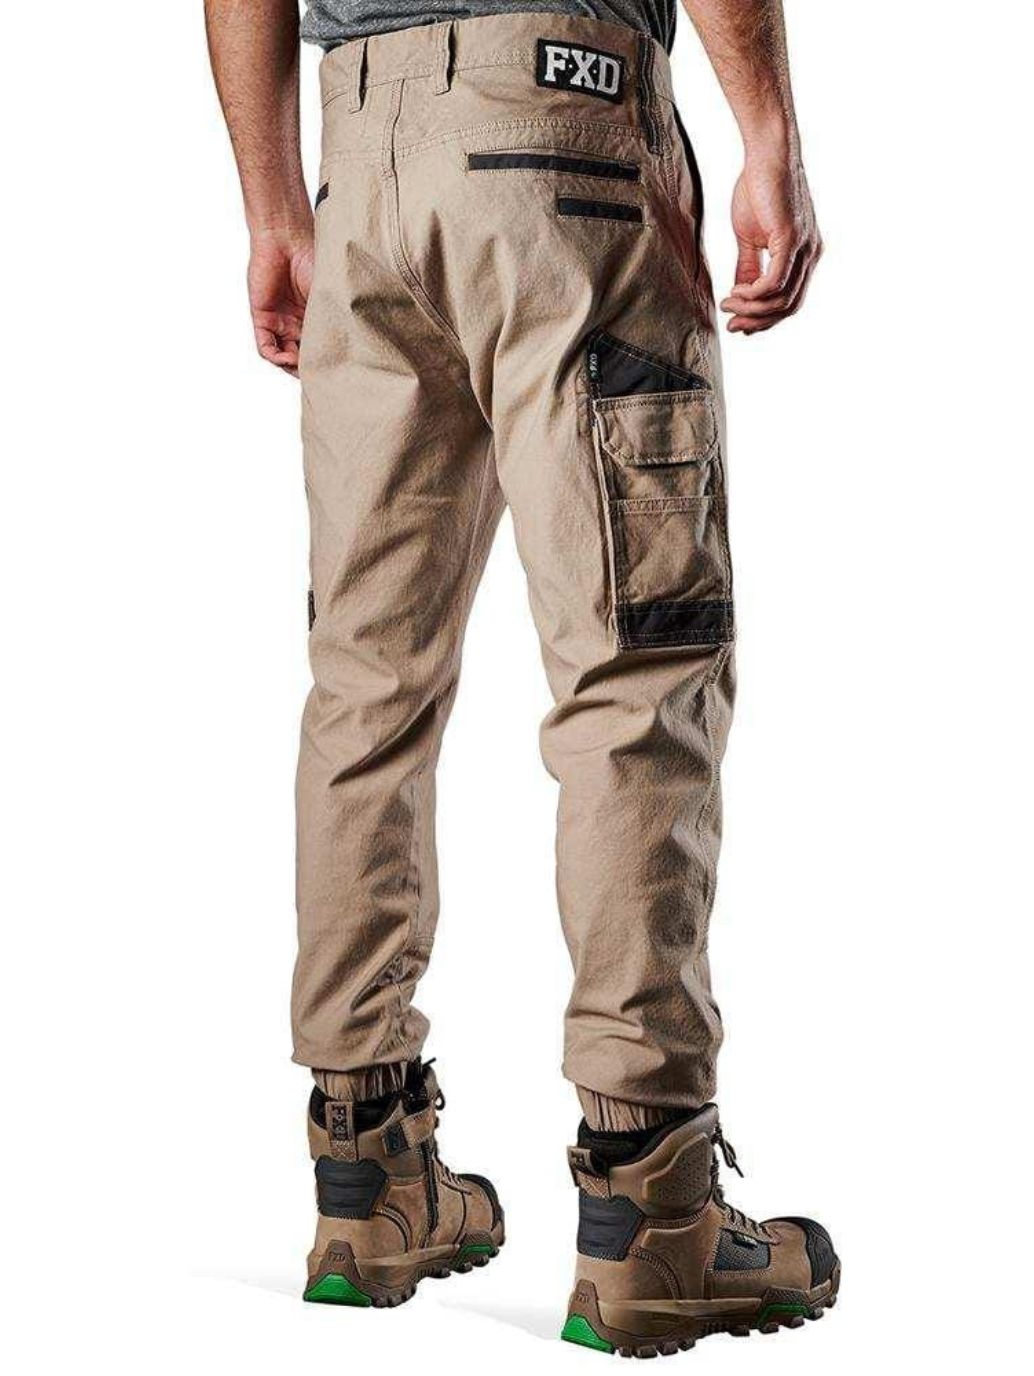 Mens Cargo Work Pants Tactical Tapered Trousers Elastic Cuffed Stretch  Cotton  eBay